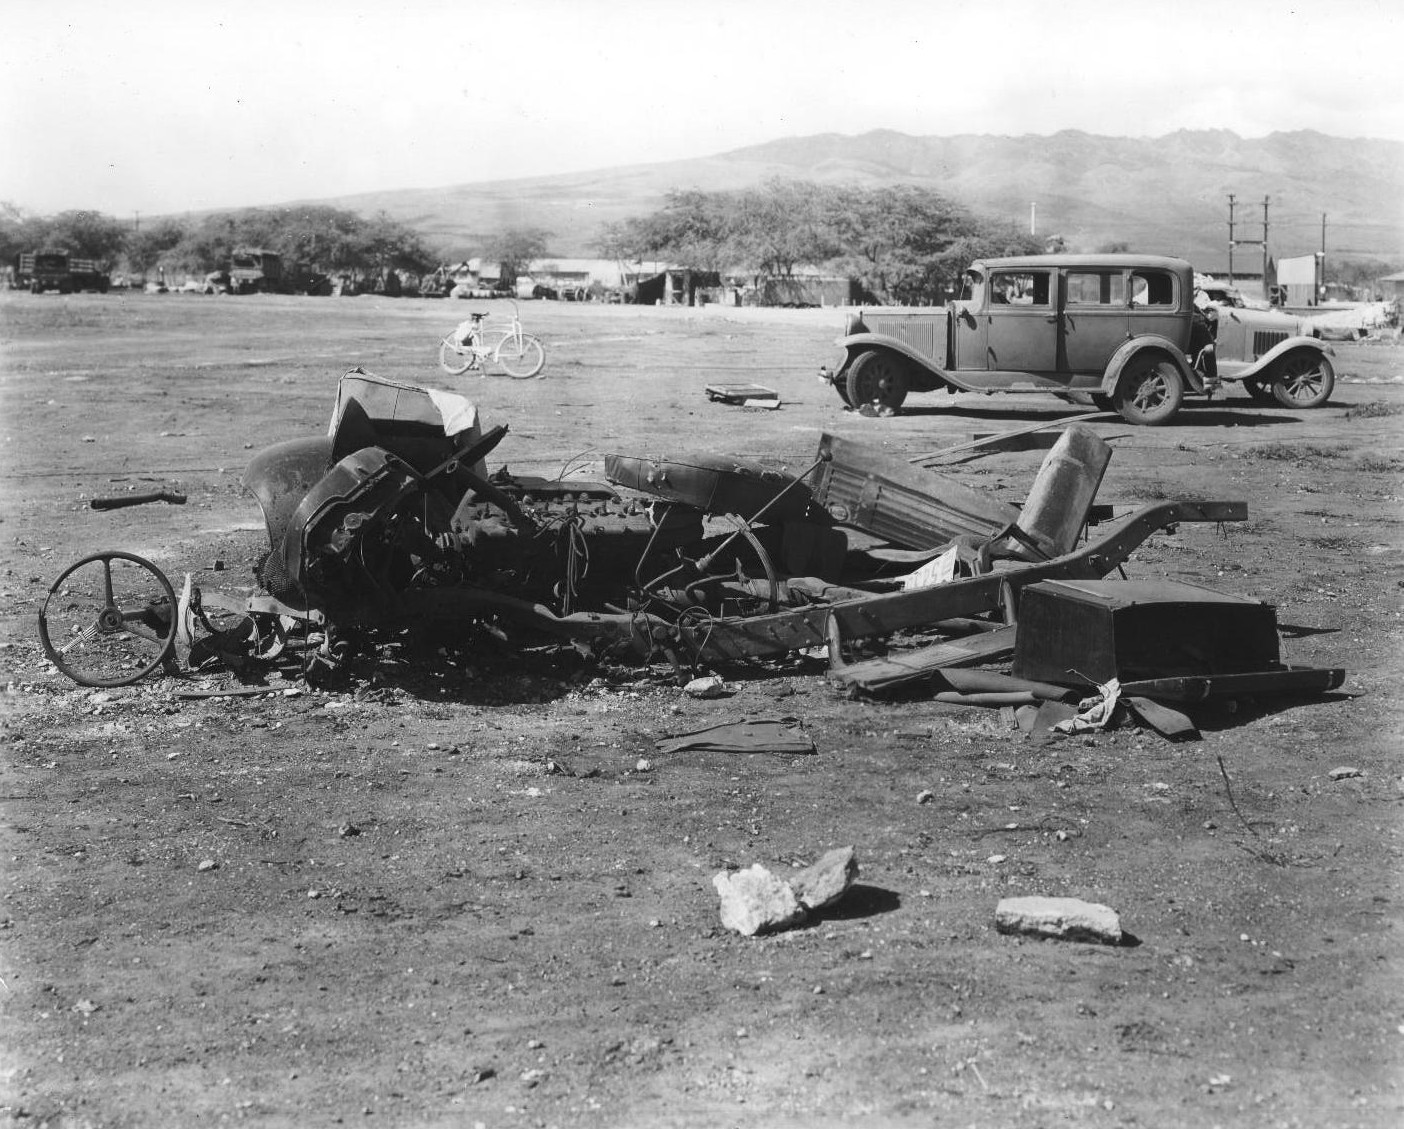 Destroyed automobile, US Territory of Hawaii, Dec 1941